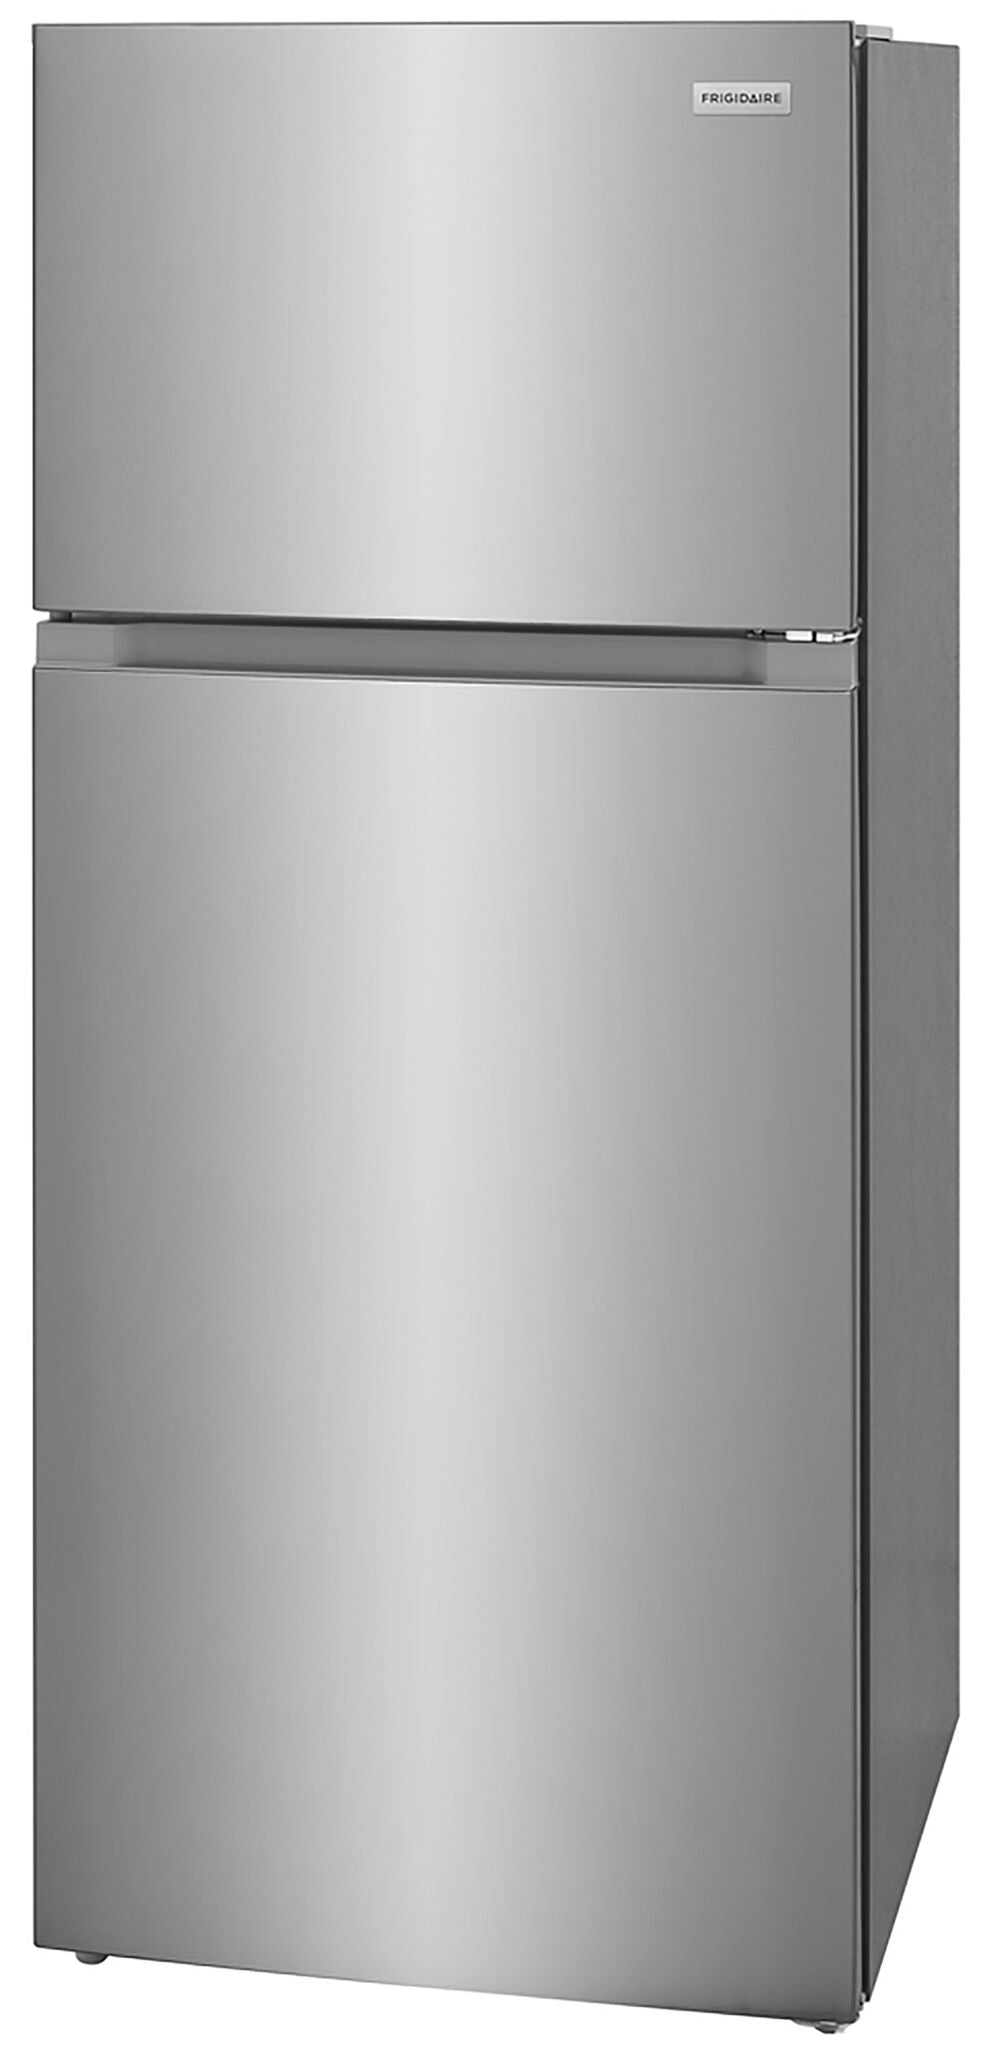 Frigidaire Stainless Steel Top Mount Refrigerator (16.03 Cu. Ft.) - FRTE1622AS